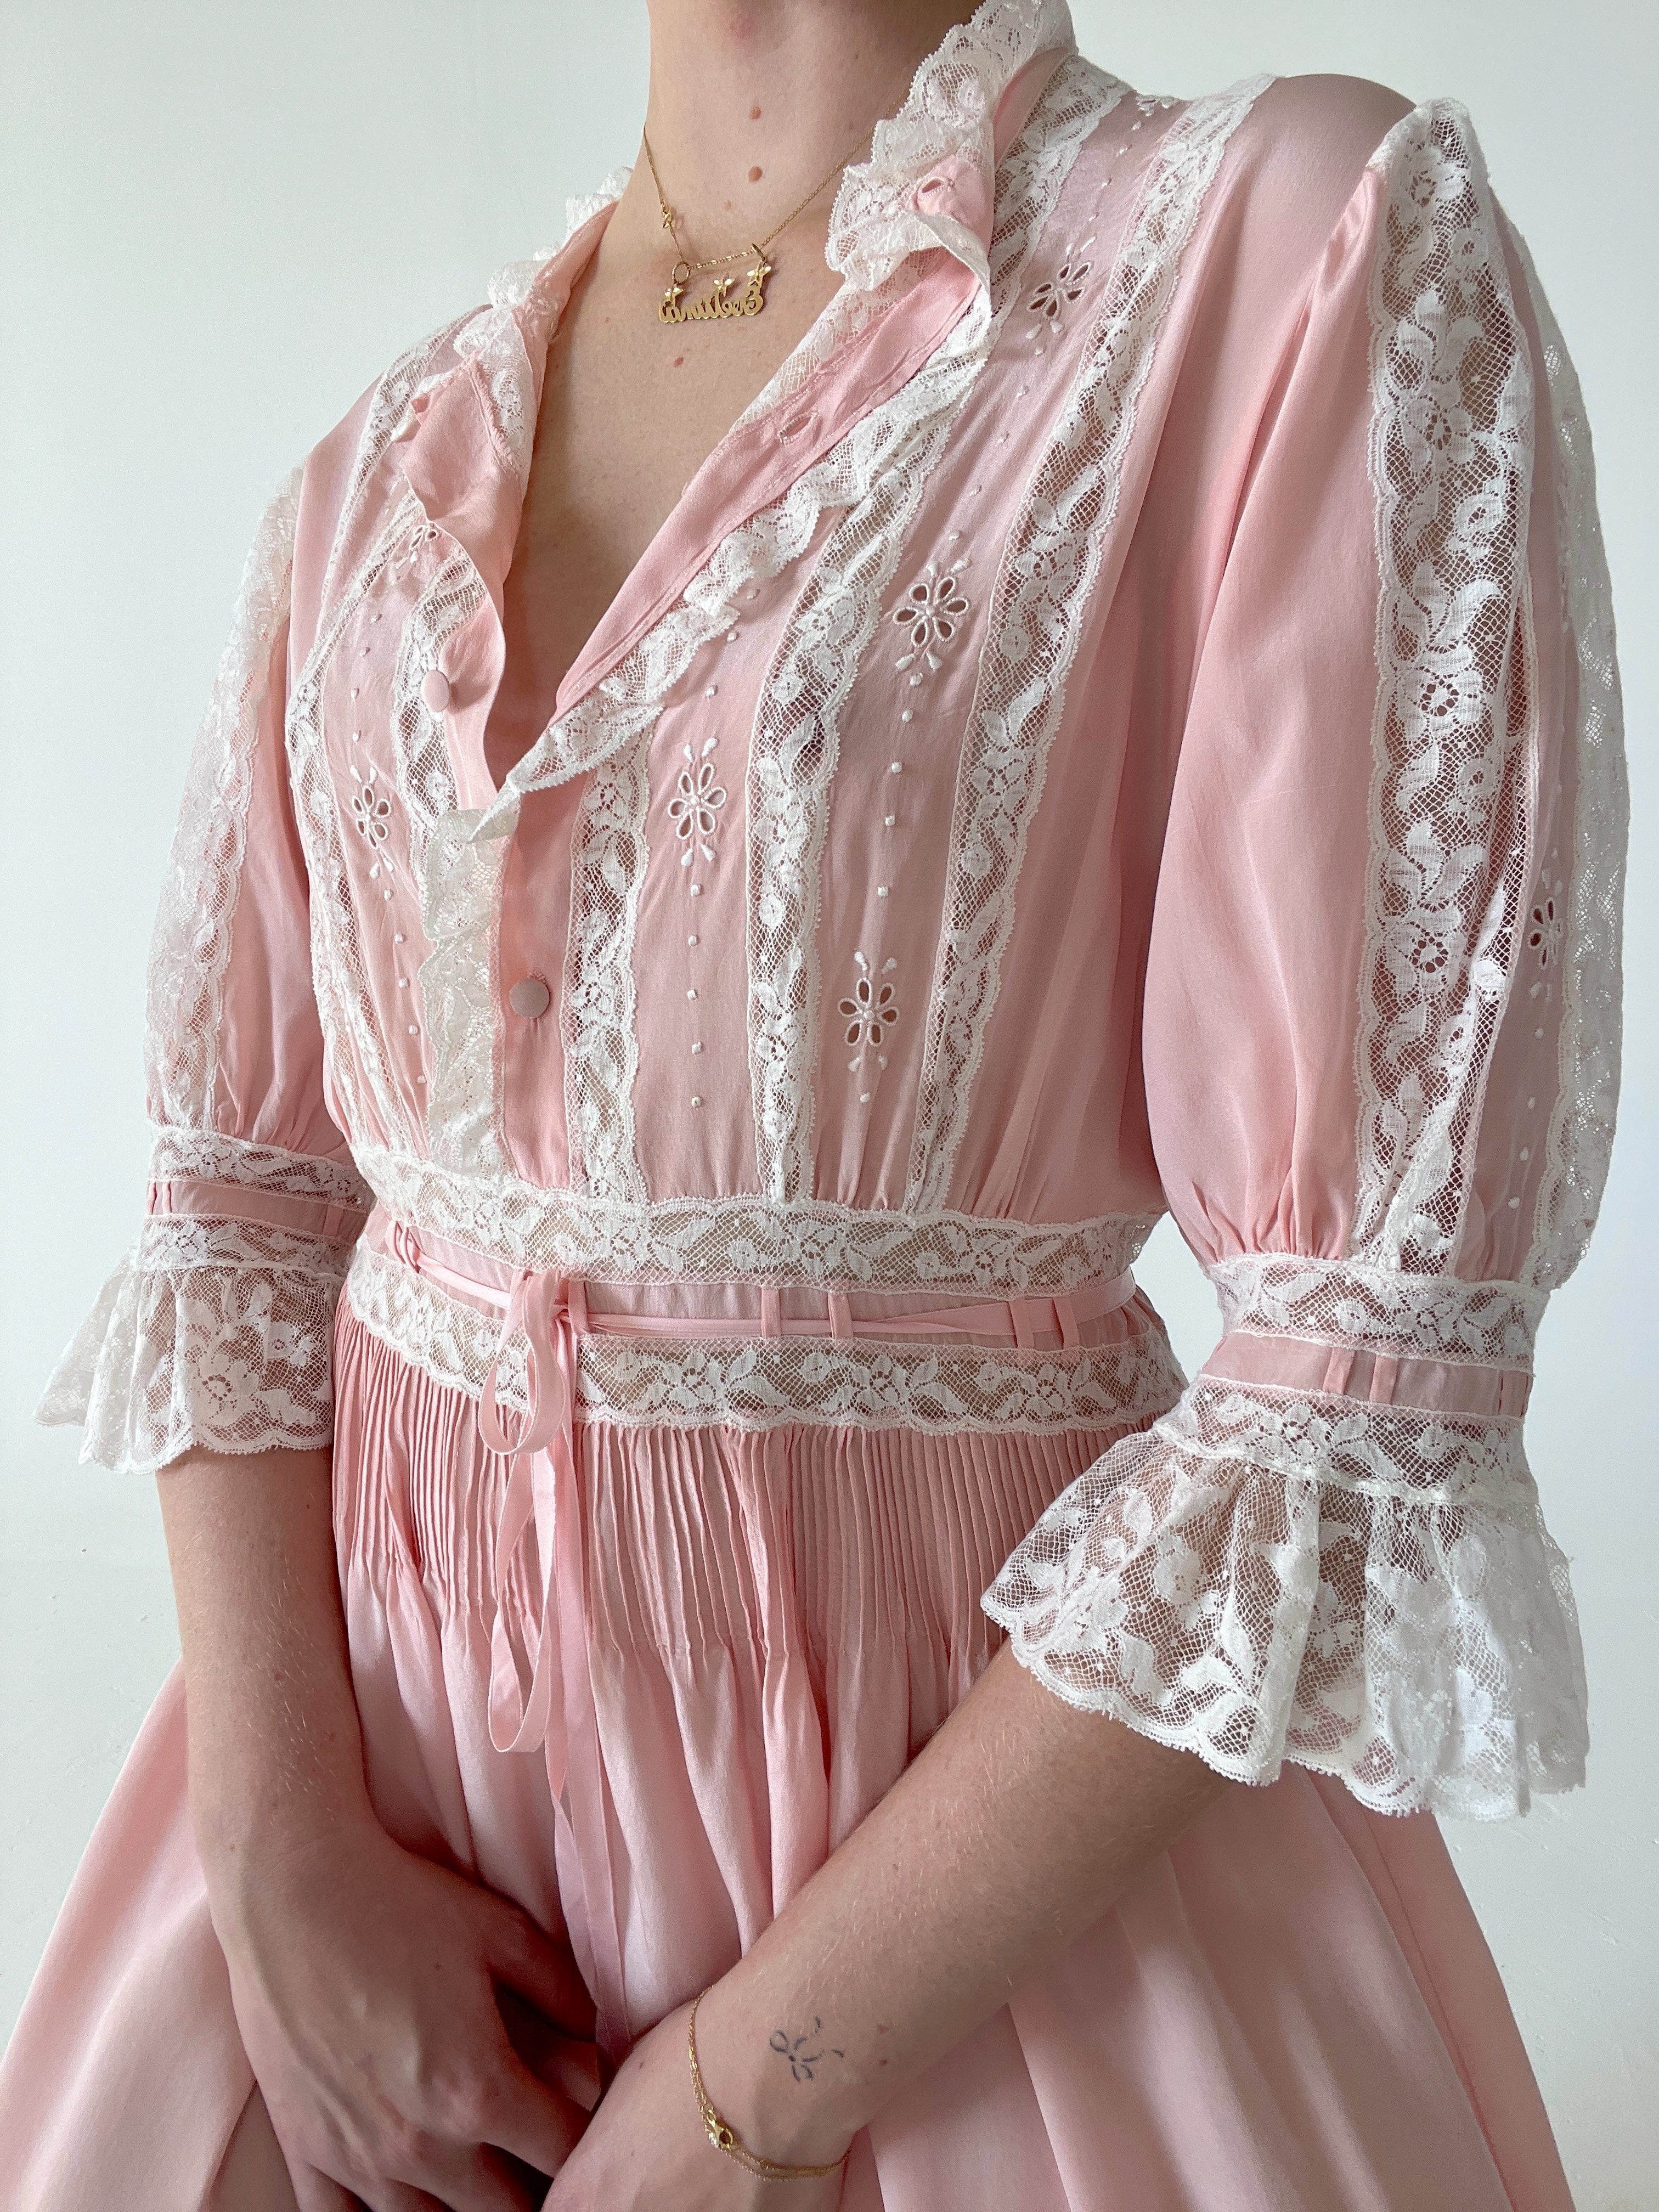 1930's Pink Silk Dress with White Lace and Embroidery